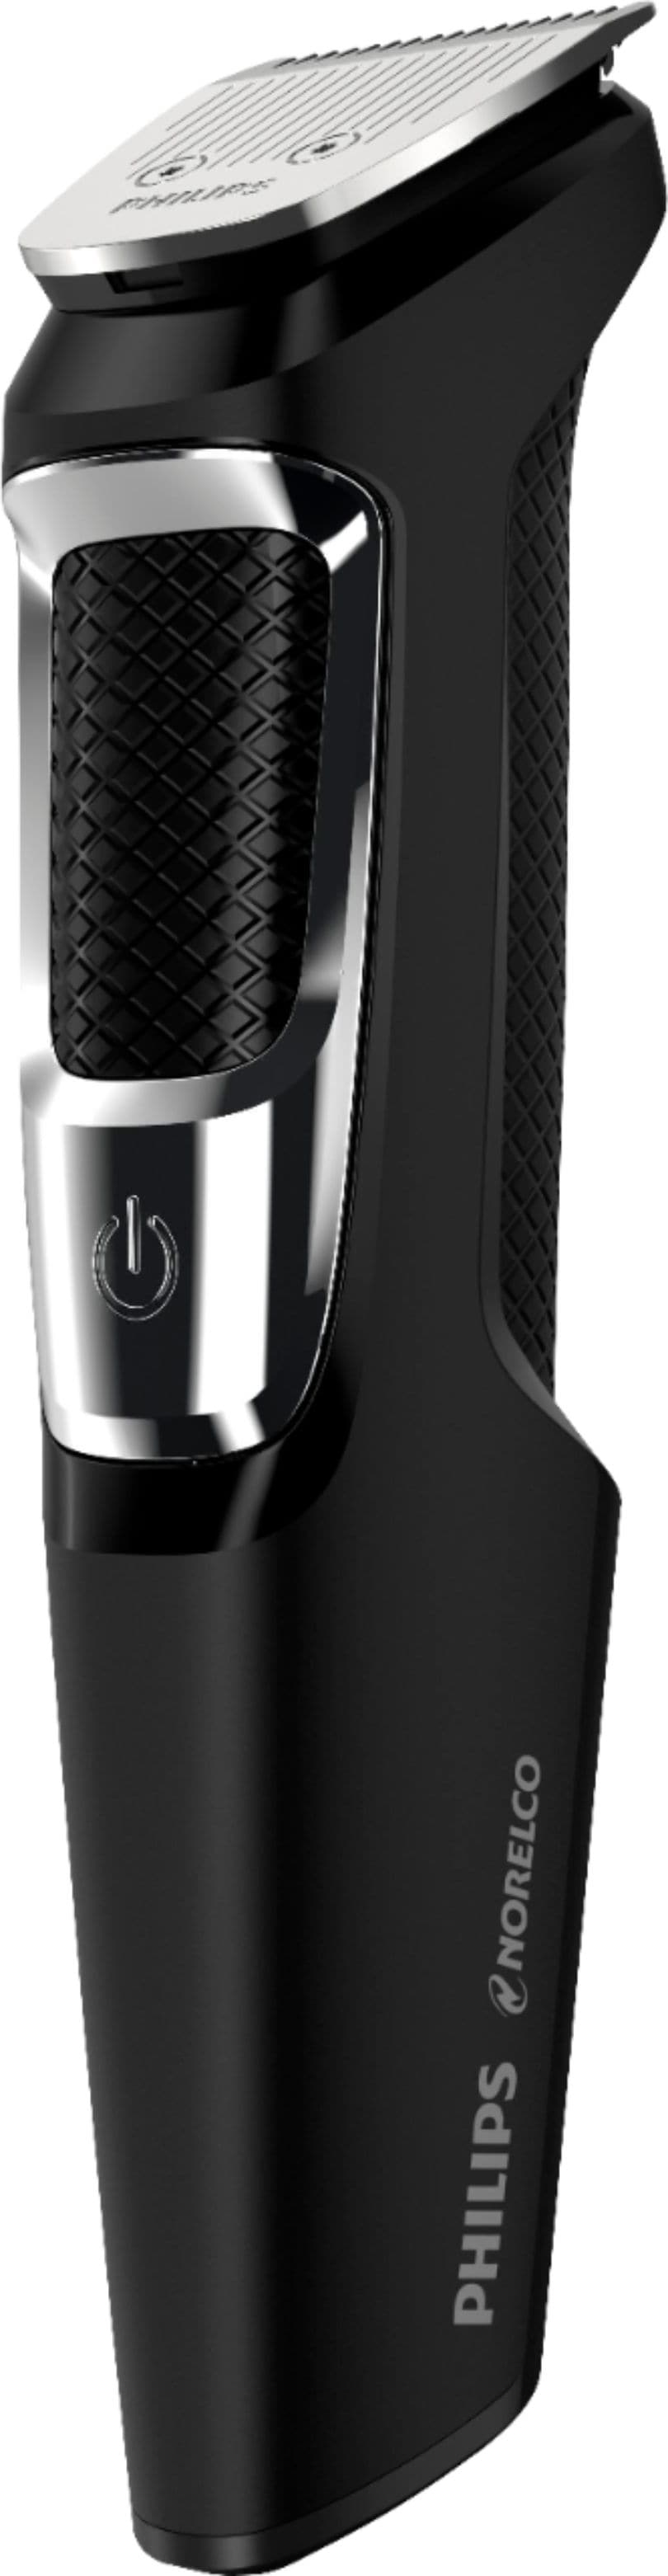 Philips Norelco - Multigroom 3000 Beard, Moustache, Ear and Nose Trimmer - Black/silver_10